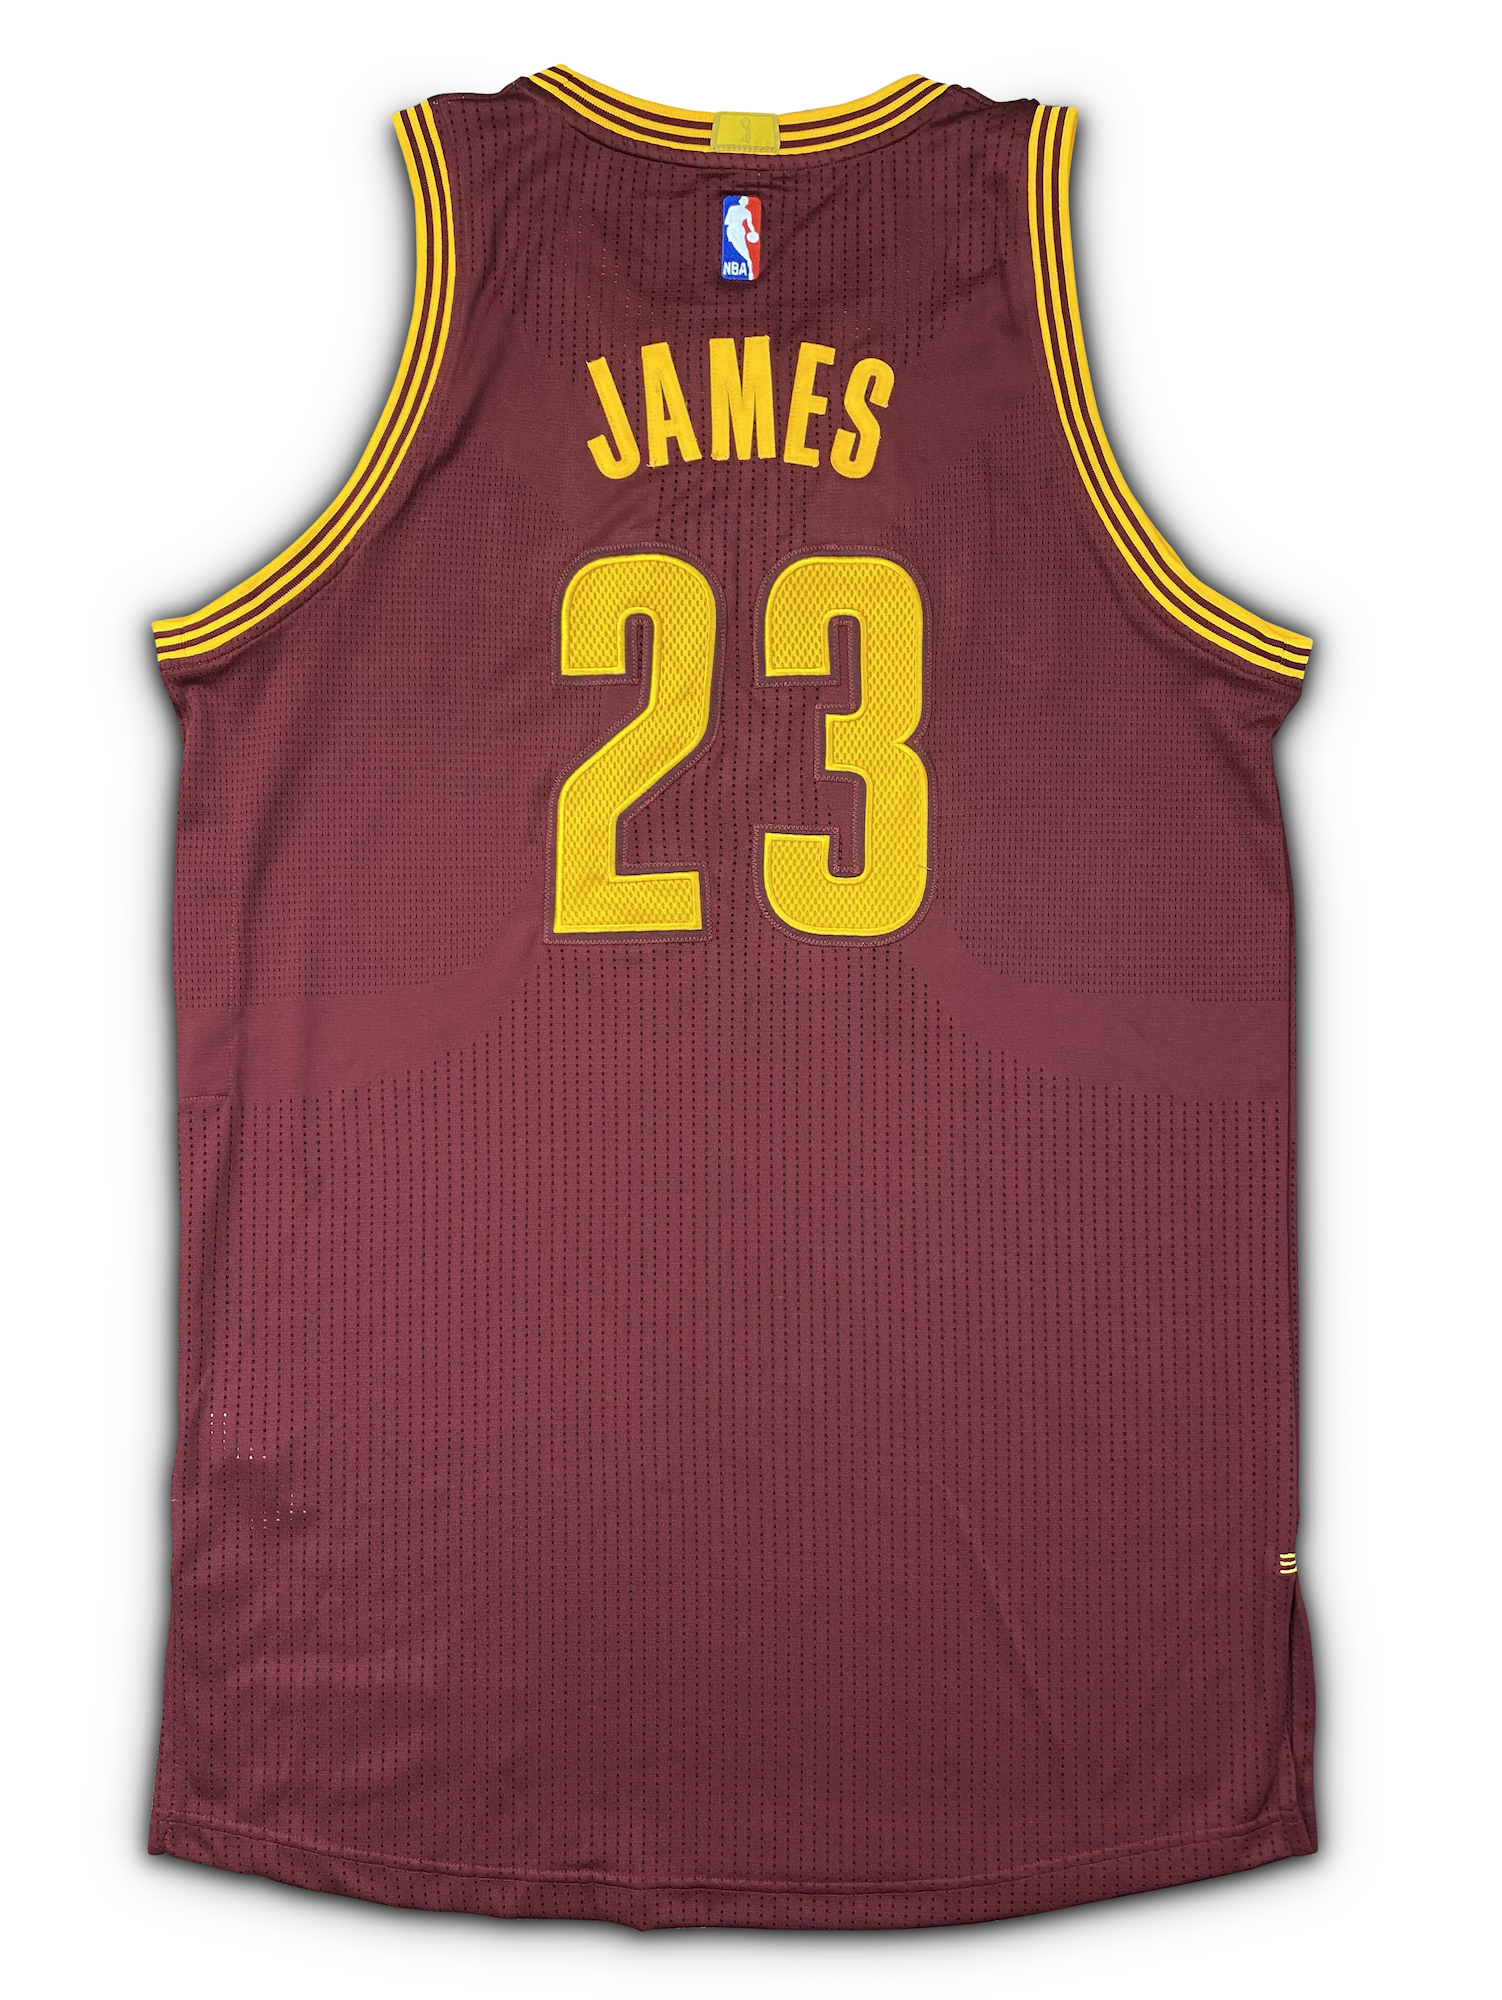 Lot Detail - LeBron James 2016-17 Cleveland Cavaliers Game Worn Road Jersey  - Evident Game Use, Team Sourced (RGU Grade 10)